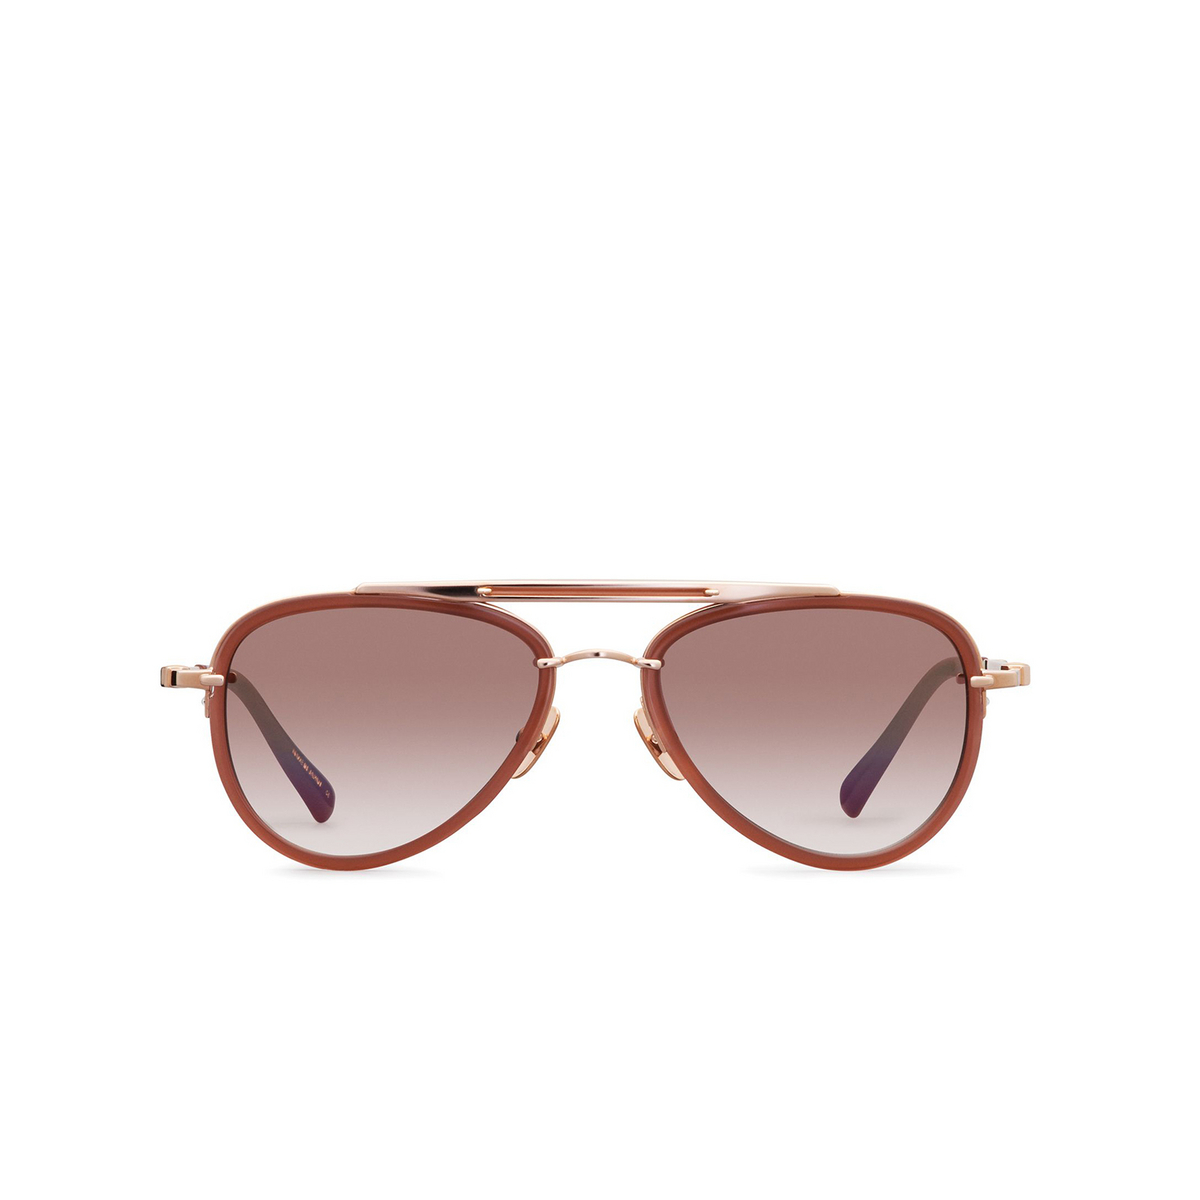 Mr. Leight DOHENY SL Sunglasses 18KRG-RW/SU 18K Rose Gold-Rosewood - front view